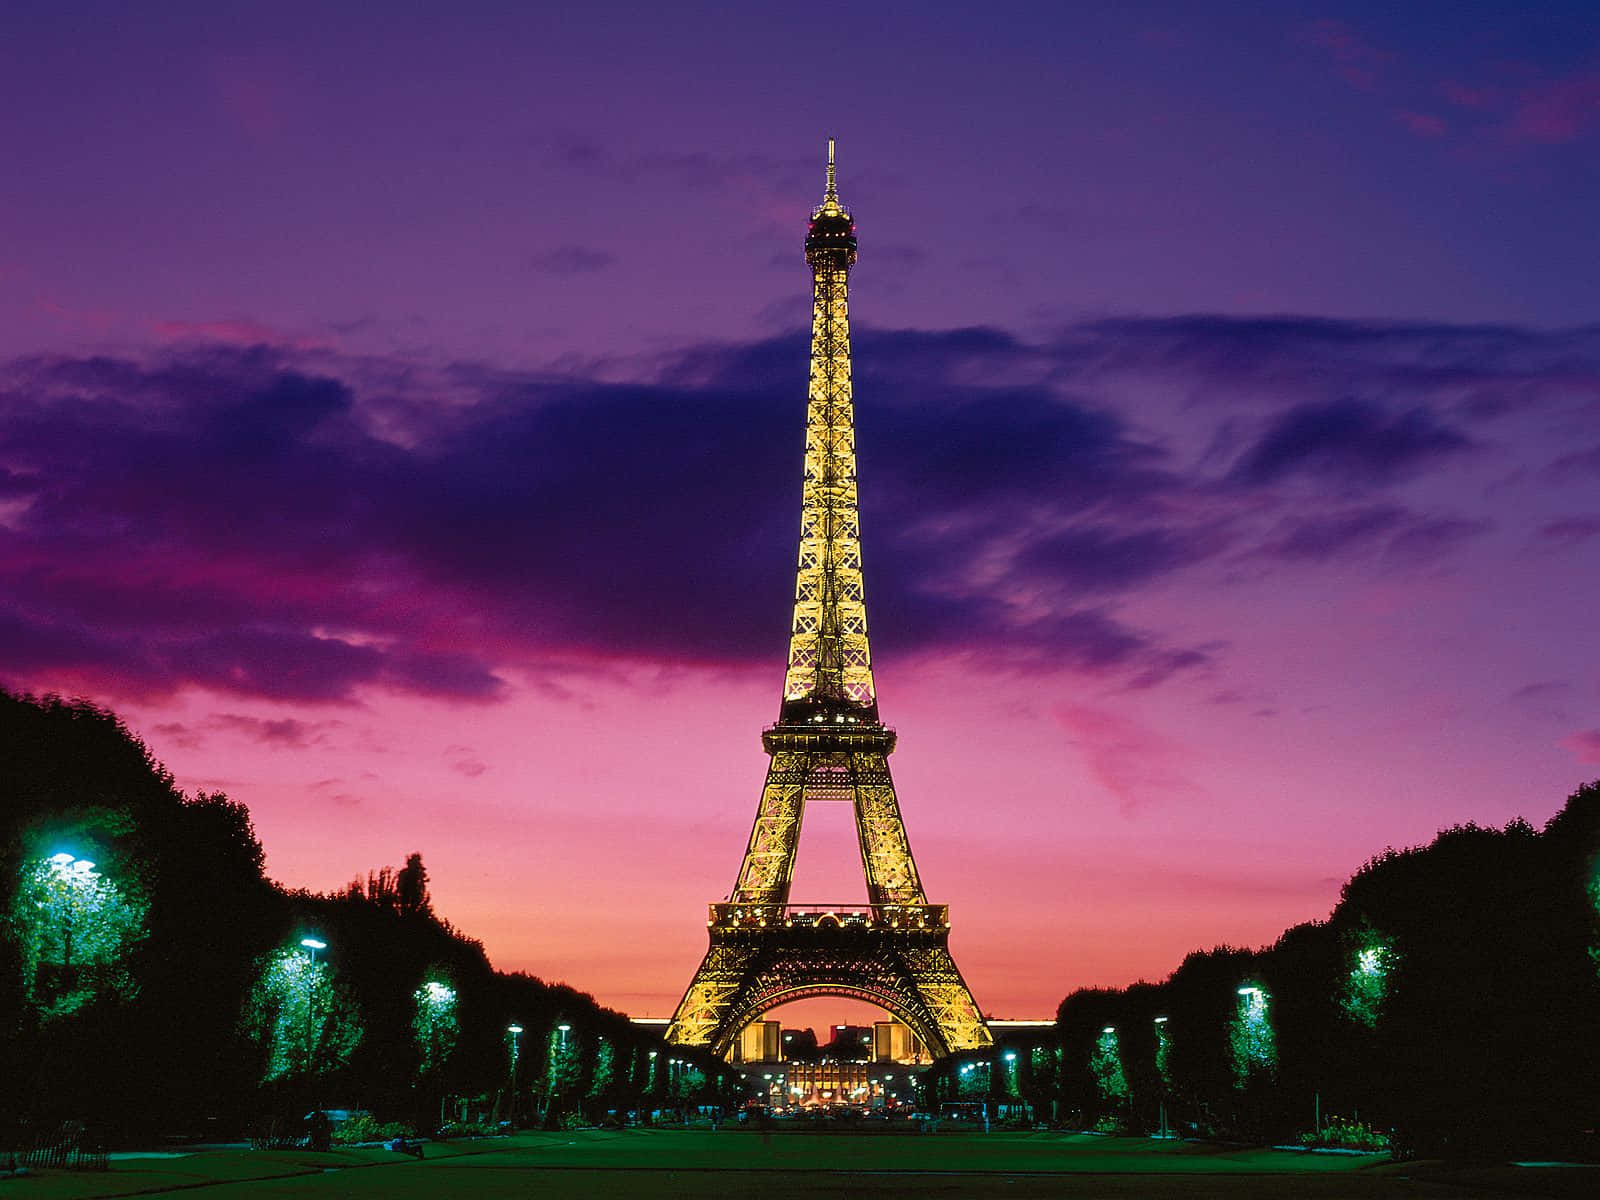 The Eiffel Tower Is Lit Up At Dusk